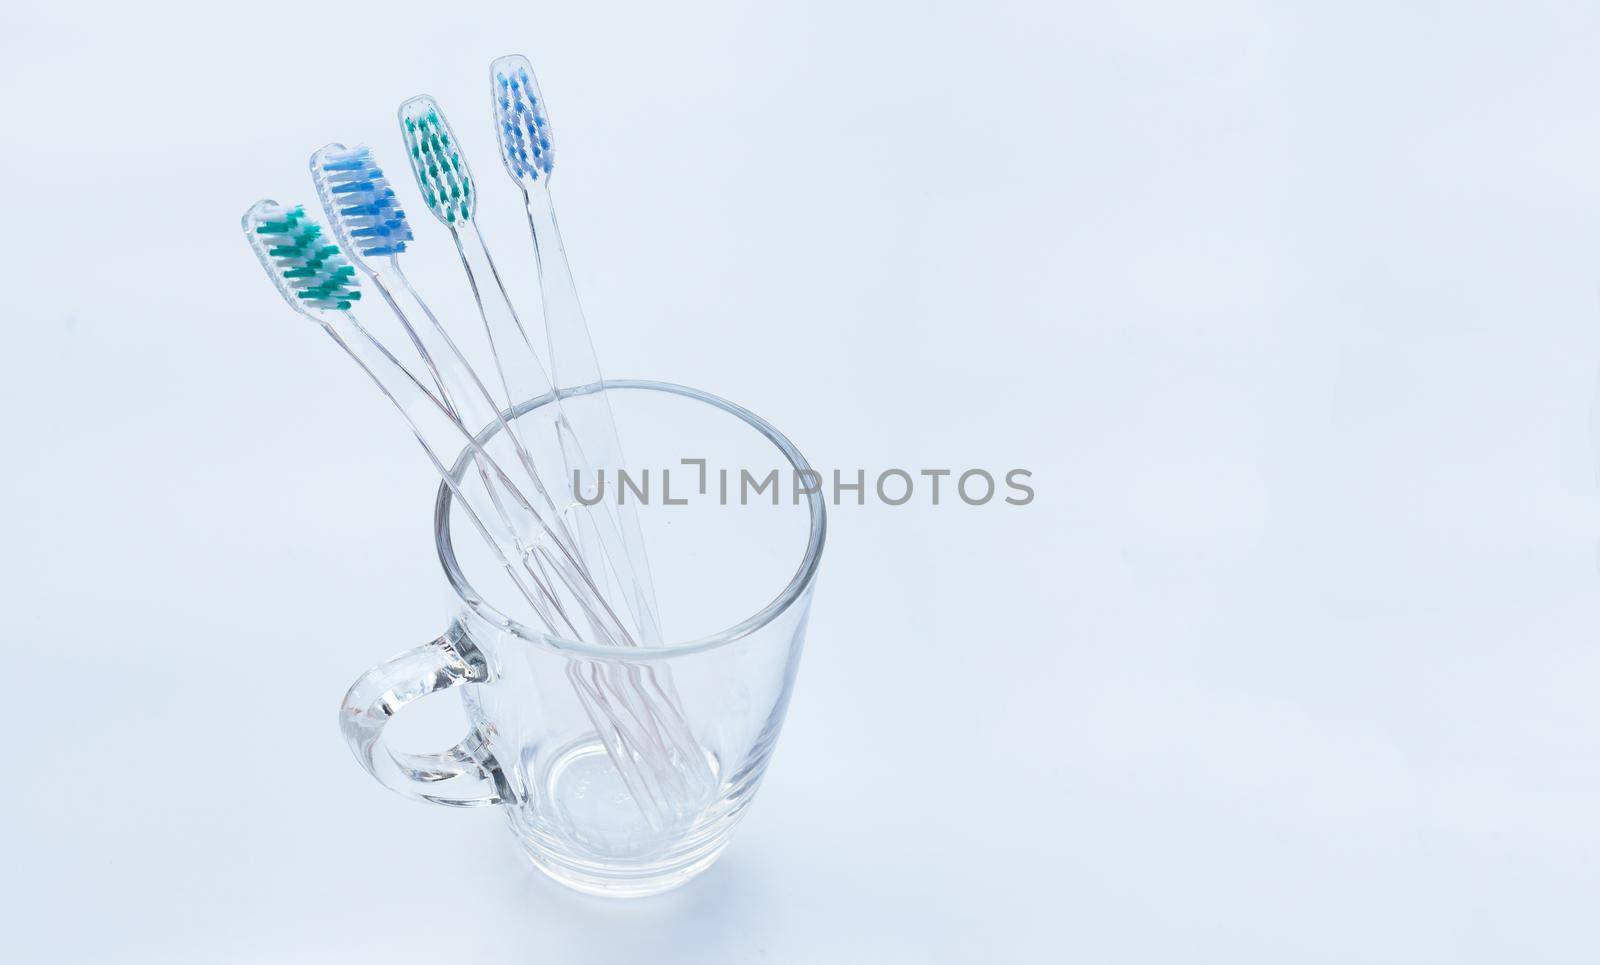 Toothbrushes in a glass on white. Copy space